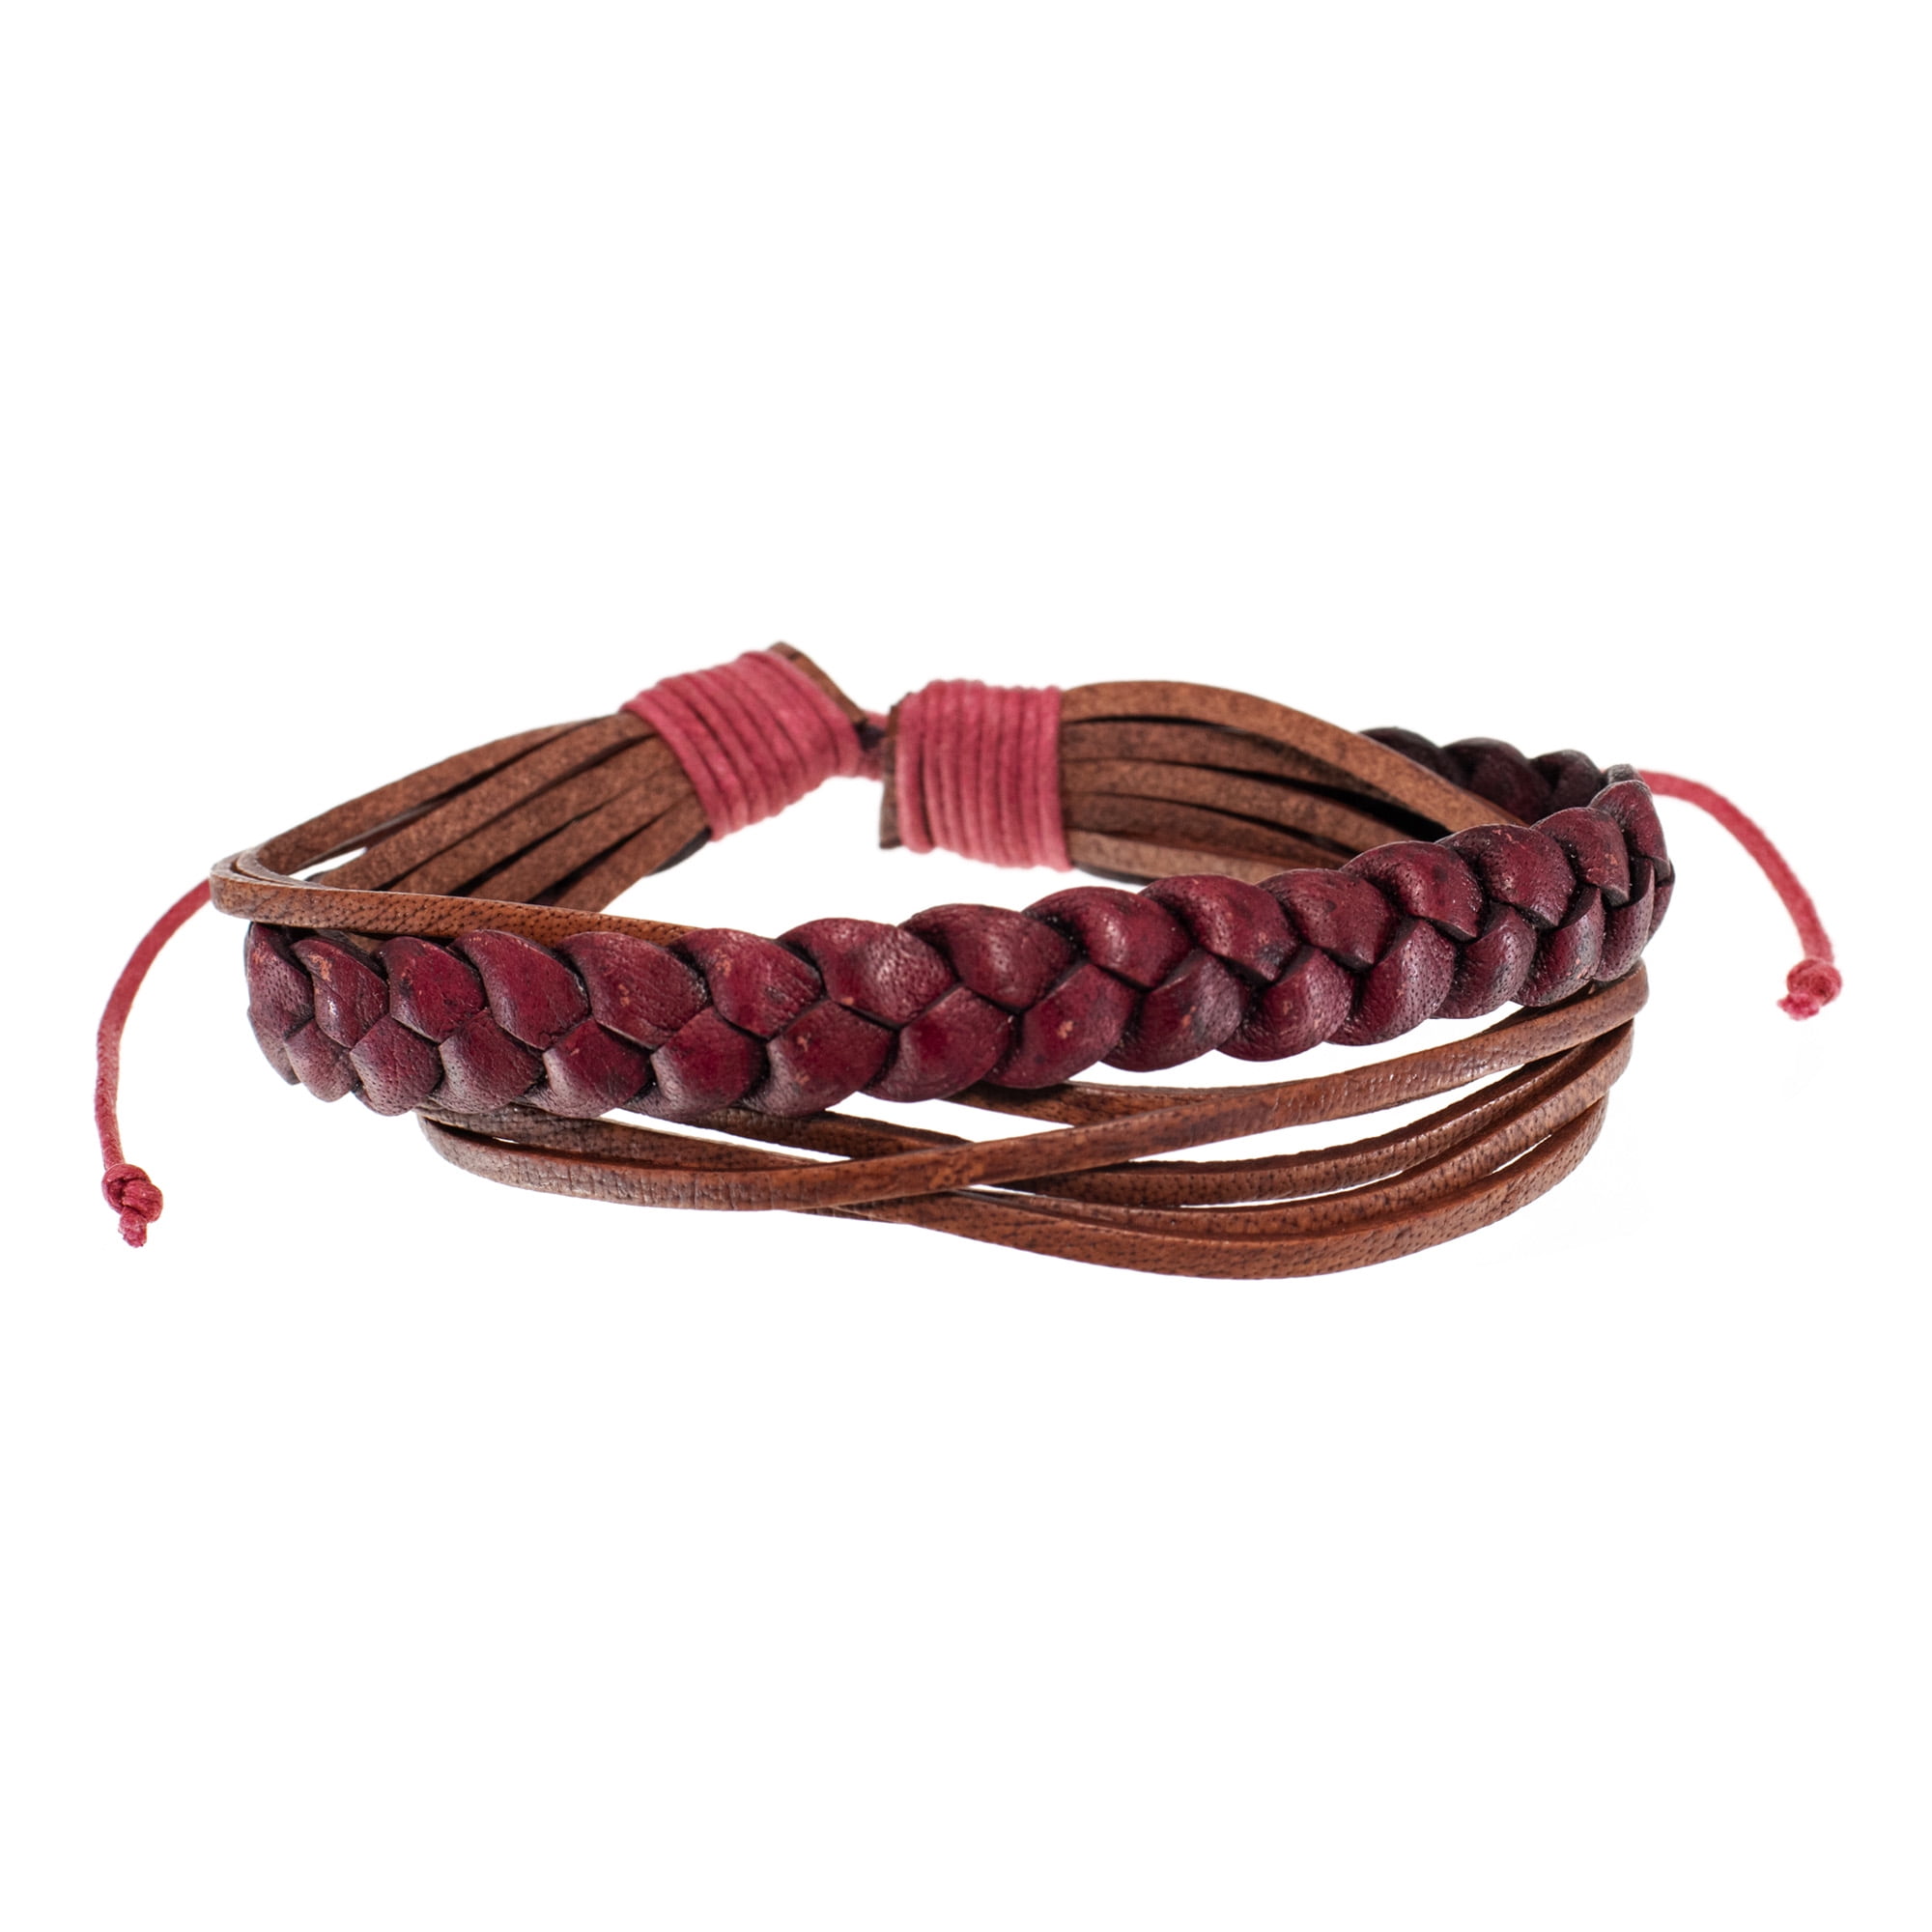 Mens Leather Bracelet Braided Brown Rustic Gift For Dad Fathers Day Cuff Wrist Band Rope Bracelet with Bronze Clasp